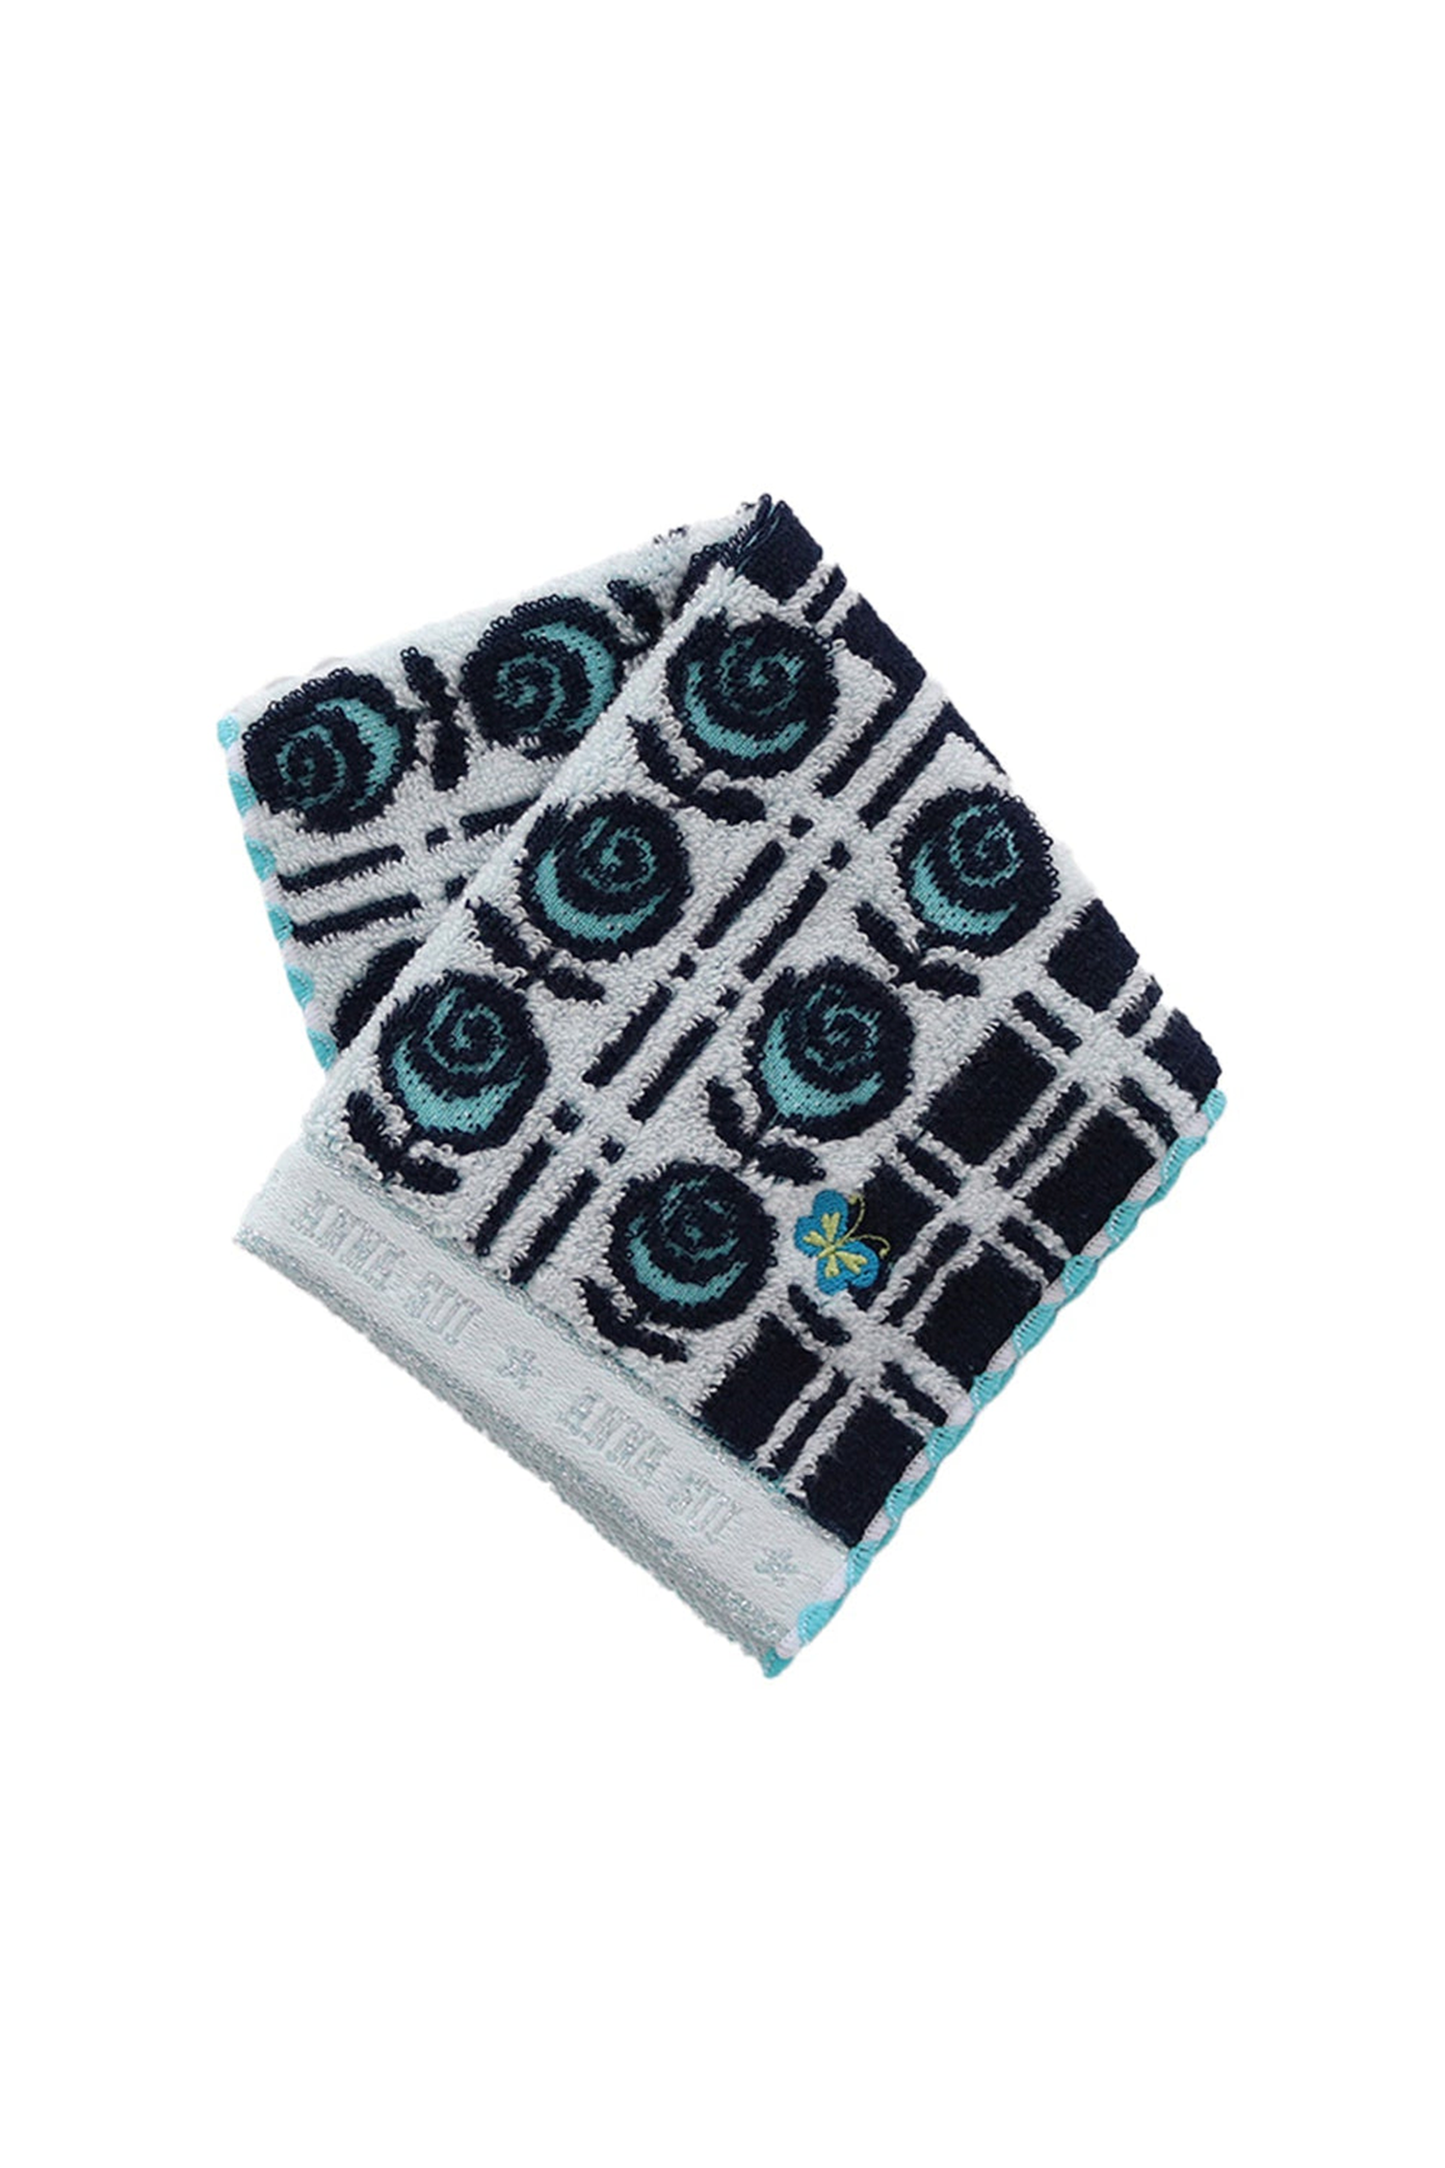 Washcloth, blue roses on white, black border at bottom white Anna Sui's signature, blue butterfly